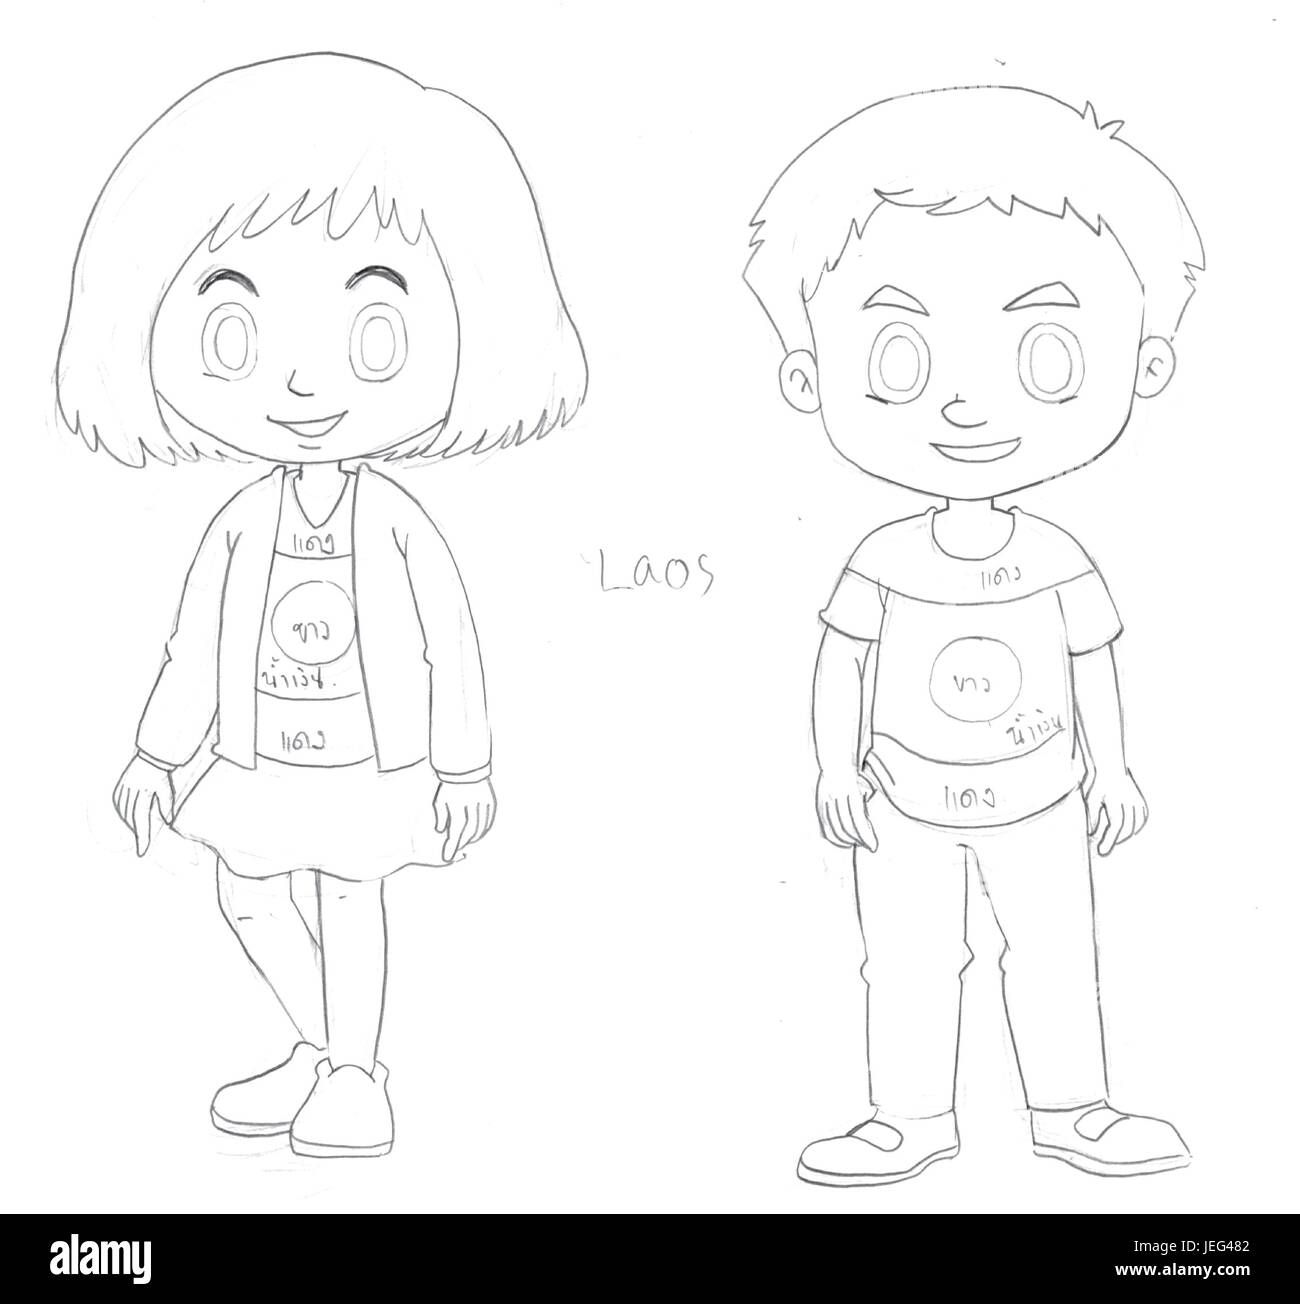 Drafting characters for kids from Laos illustration Stock Vector